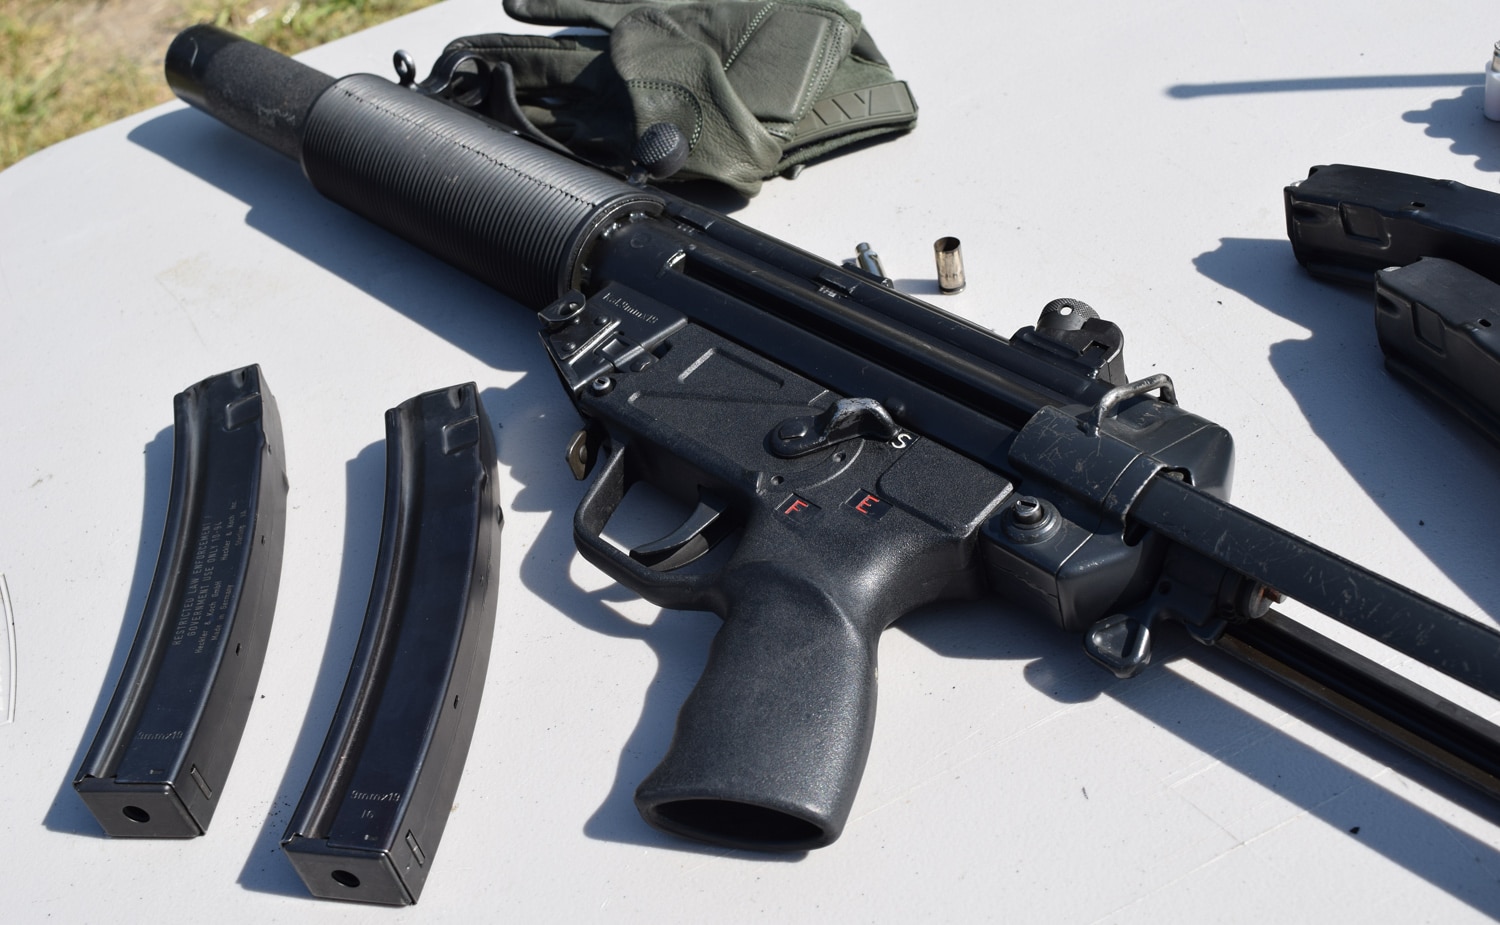 The HK MP5 on display is chambered in 9mm and equipped with an integral suppressor and select fire options. (Photo: Daniel Terrill/Guns.com)